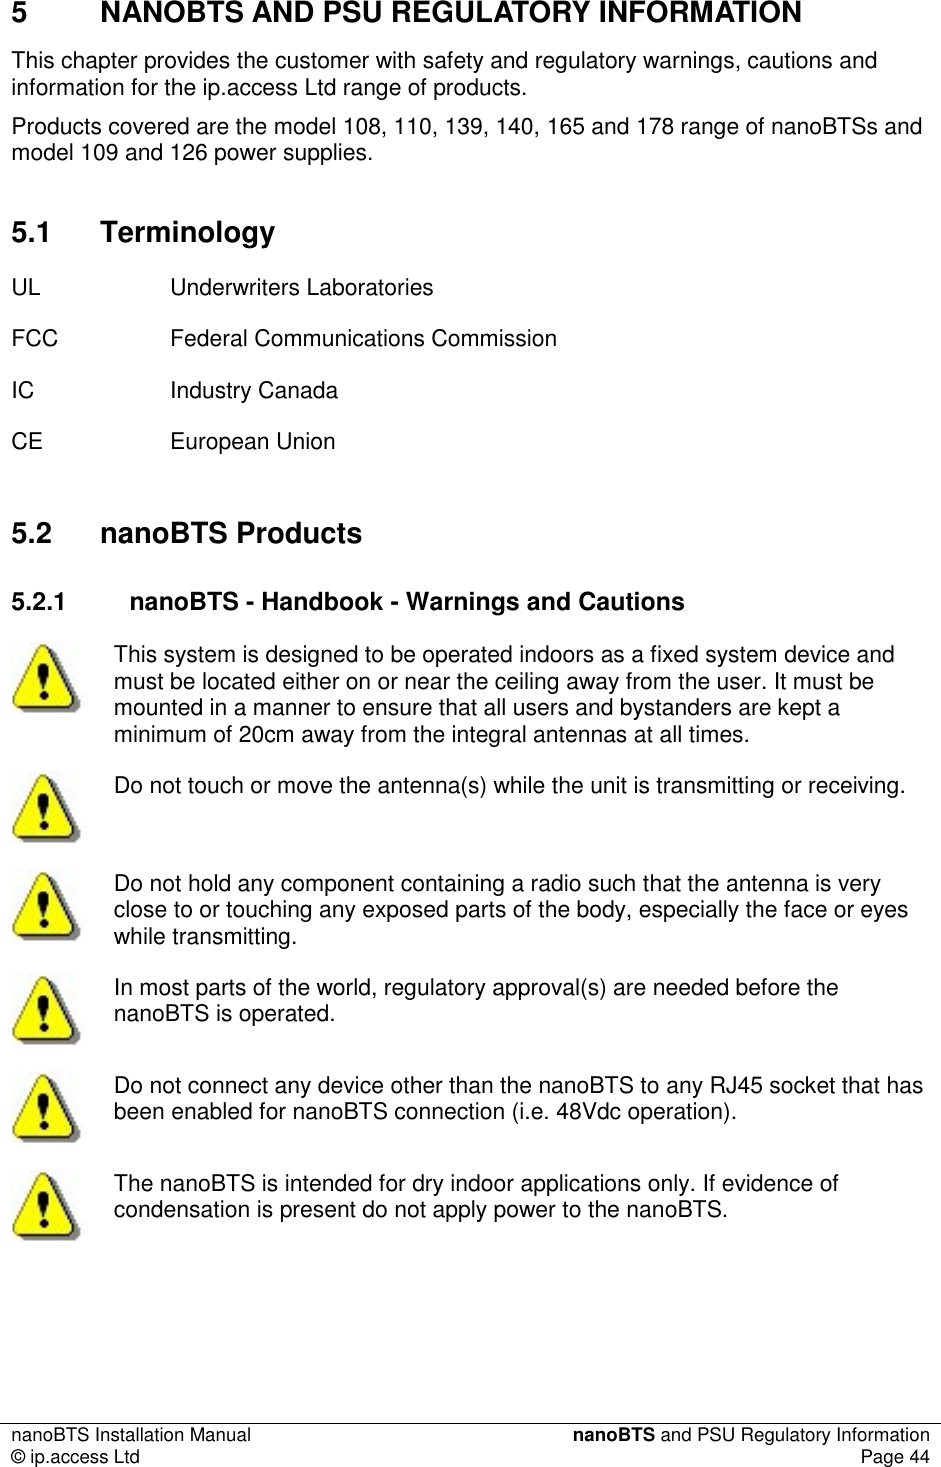 nanoBTS Installation Manual  nanoBTS and PSU Regulatory Information © ip.access Ltd  Page 44  5  NANOBTS AND PSU REGULATORY INFORMATION This chapter provides the customer with safety and regulatory warnings, cautions and information for the ip.access Ltd range of products. Products covered are the model 108, 110, 139, 140, 165 and 178 range of nanoBTSs and model 109 and 126 power supplies. 5.1  Terminology UL  Underwriters Laboratories  FCC  Federal Communications Commission IC  Industry Canada CE  European Union 5.2  nanoBTS Products 5.2.1  nanoBTS - Handbook - Warnings and Cautions  This system is designed to be operated indoors as a fixed system device and must be located either on or near the ceiling away from the user. It must be mounted in a manner to ensure that all users and bystanders are kept a minimum of 20cm away from the integral antennas at all times.  Do not touch or move the antenna(s) while the unit is transmitting or receiving.  Do not hold any component containing a radio such that the antenna is very close to or touching any exposed parts of the body, especially the face or eyes while transmitting.  In most parts of the world, regulatory approval(s) are needed before the nanoBTS is operated.  Do not connect any device other than the nanoBTS to any RJ45 socket that has been enabled for nanoBTS connection (i.e. 48Vdc operation).  The nanoBTS is intended for dry indoor applications only. If evidence of condensation is present do not apply power to the nanoBTS. 